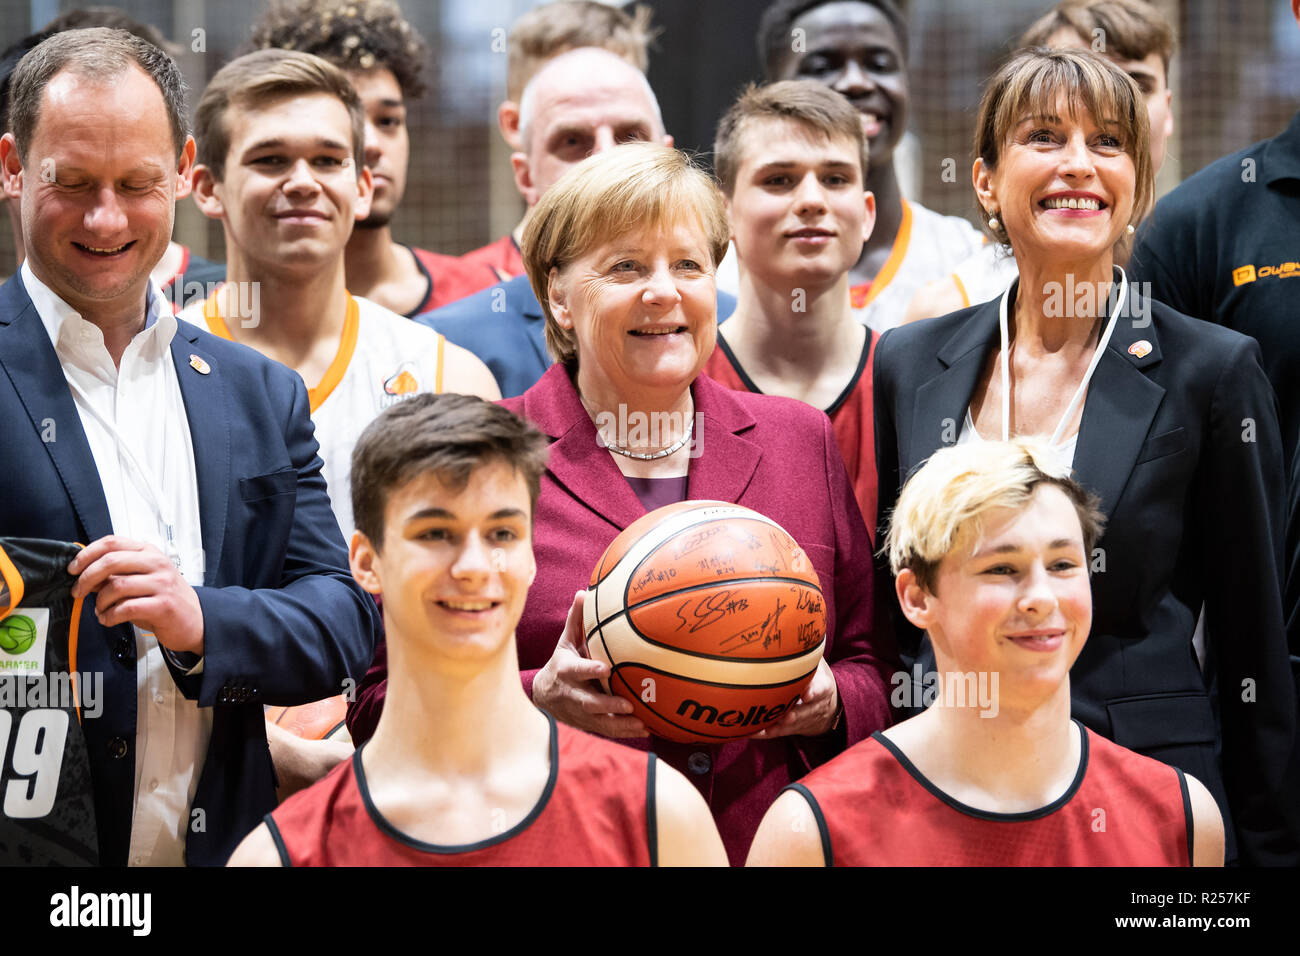 Chemnitz, Germany. 16th Nov, 2018. German Chancellor Angela Merkel (C)  poses for group photos with members of the basketball club Niners Chemnitz  during her visit in Chemnitz, eastern Germany, on Nov. 16,